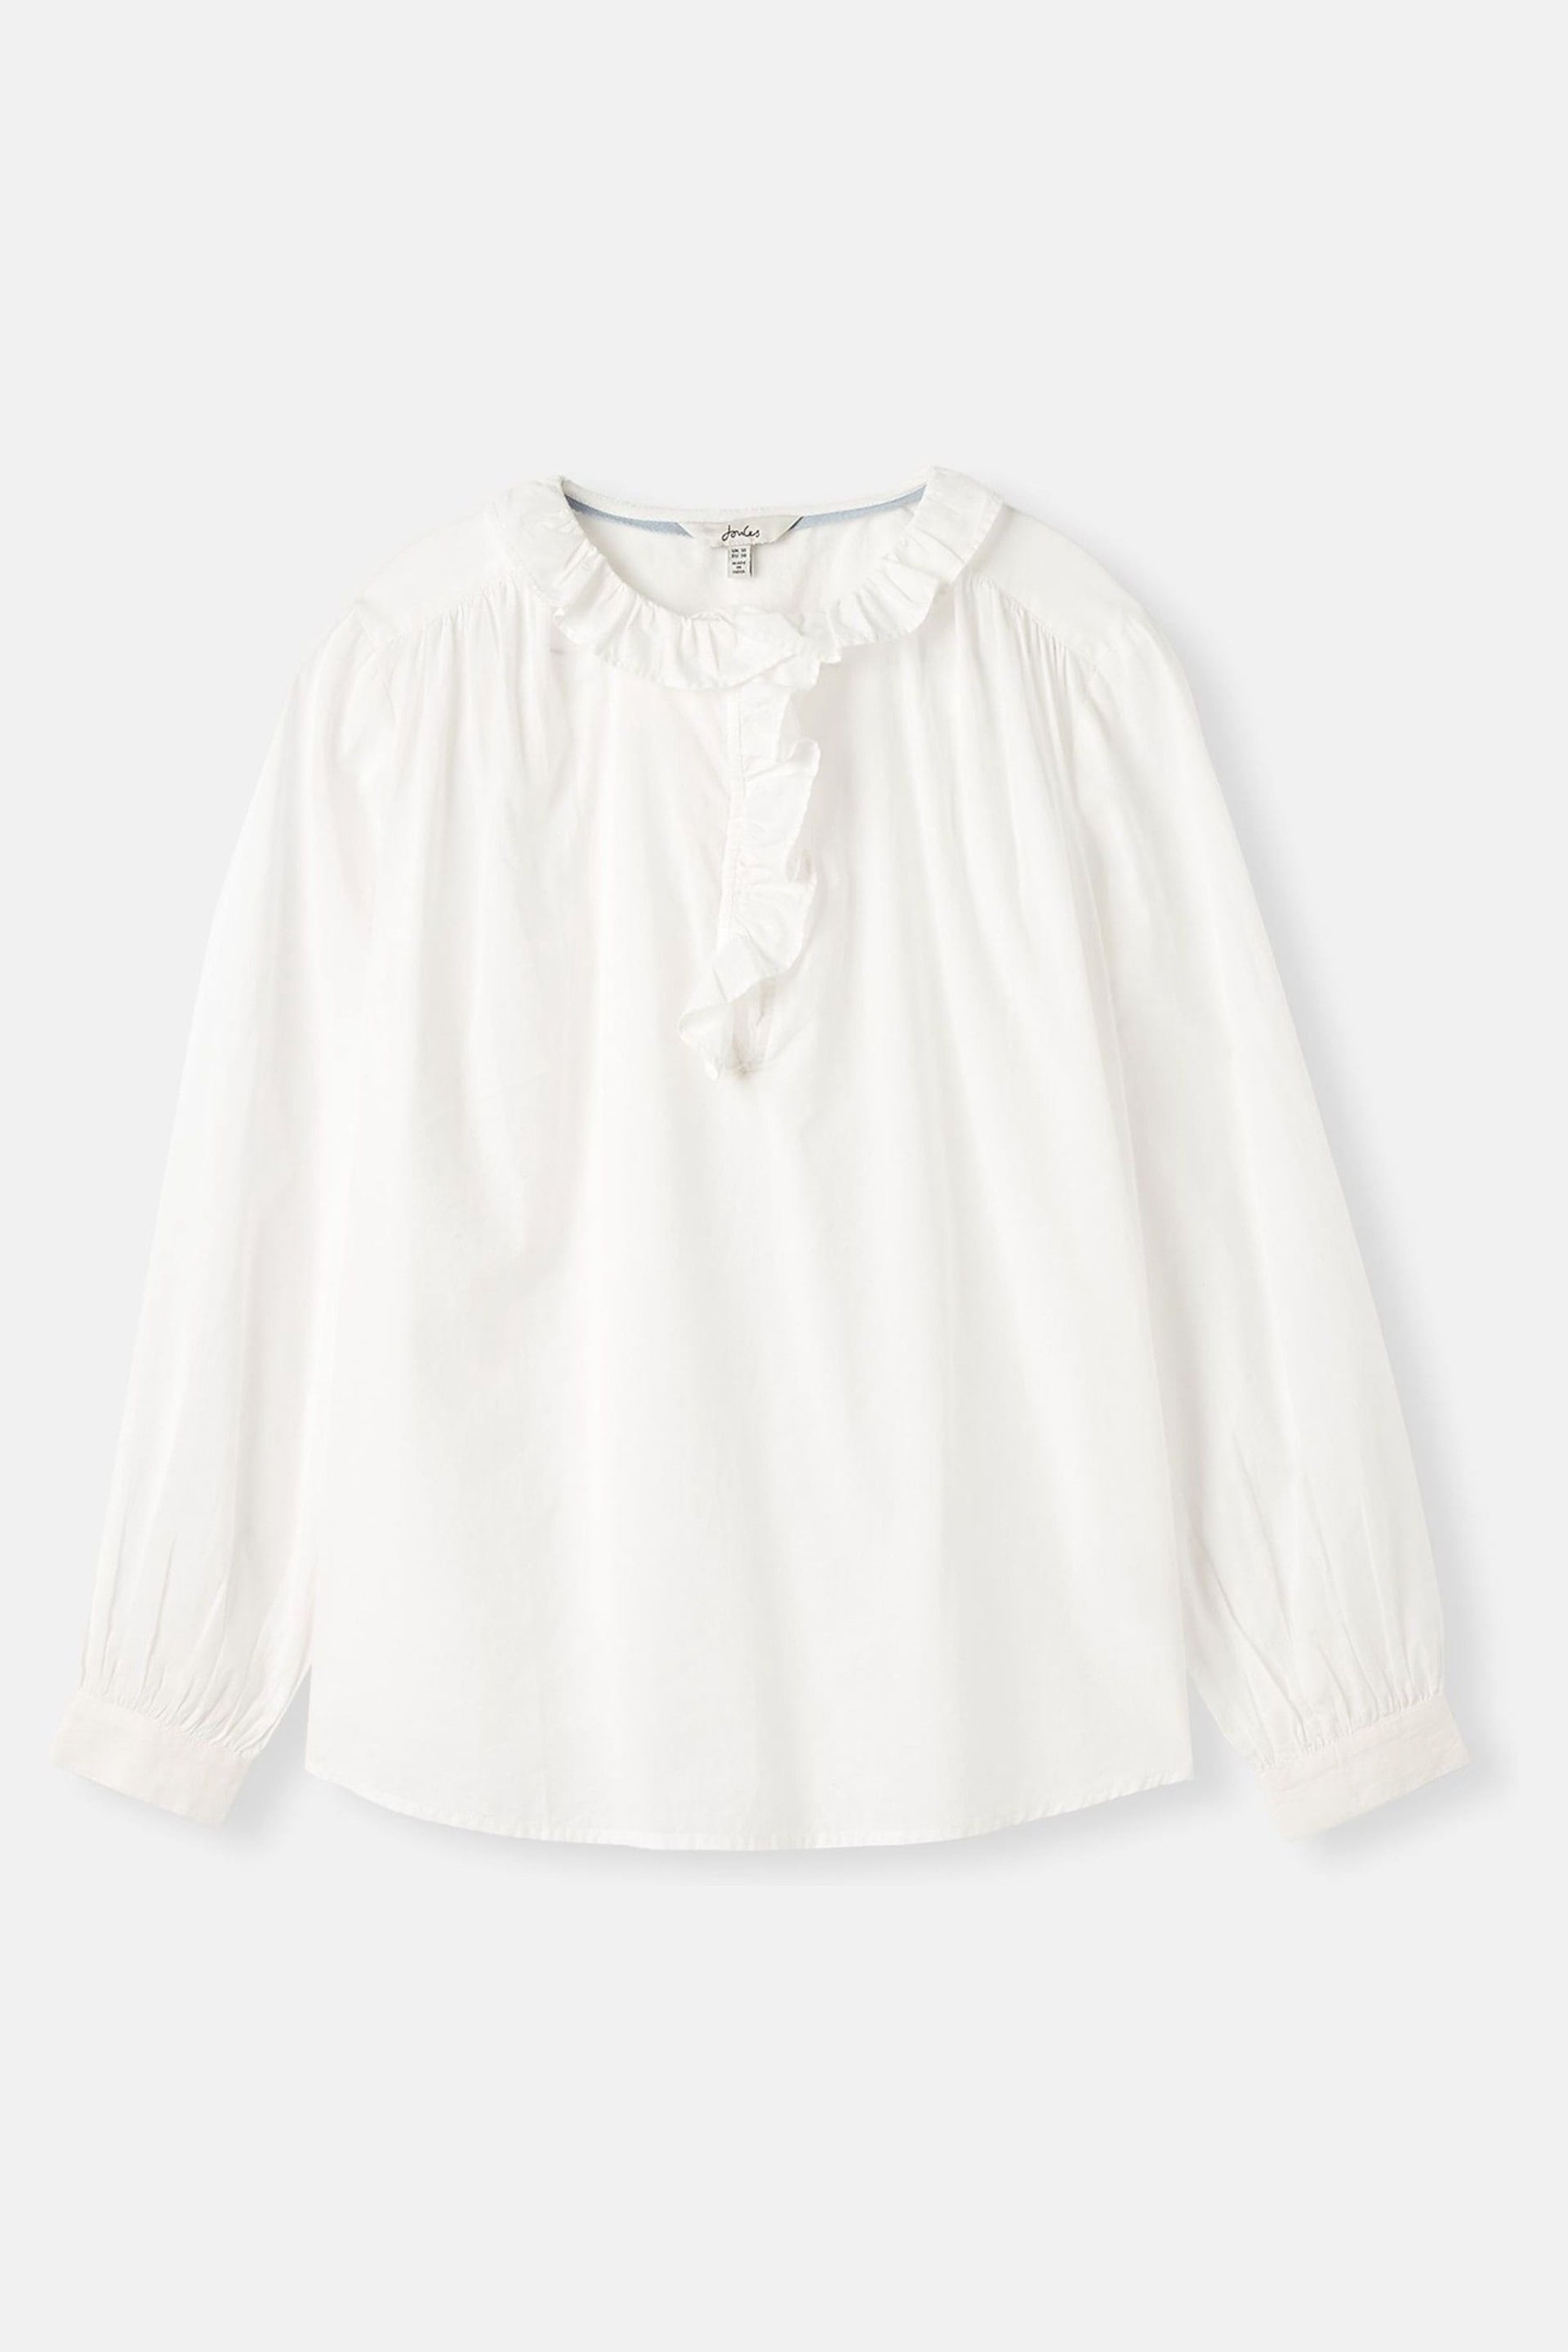 Joules Melanie White Frill Blouse - Image 5 of 5